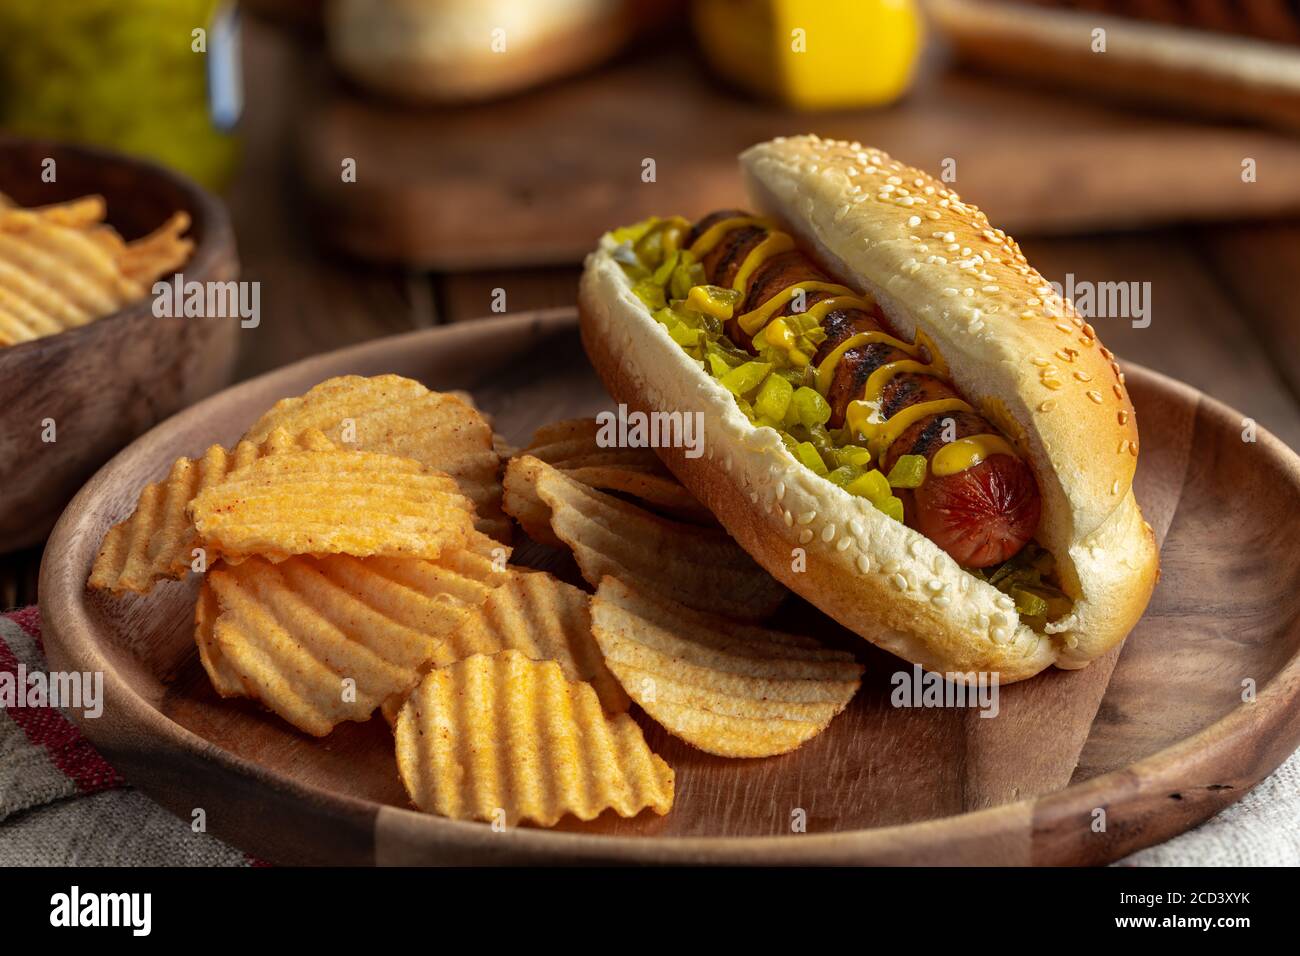 Grilled hot dog with mustard and relish on a sesame seed bun and potato chips on a wooden plate Stock Photo